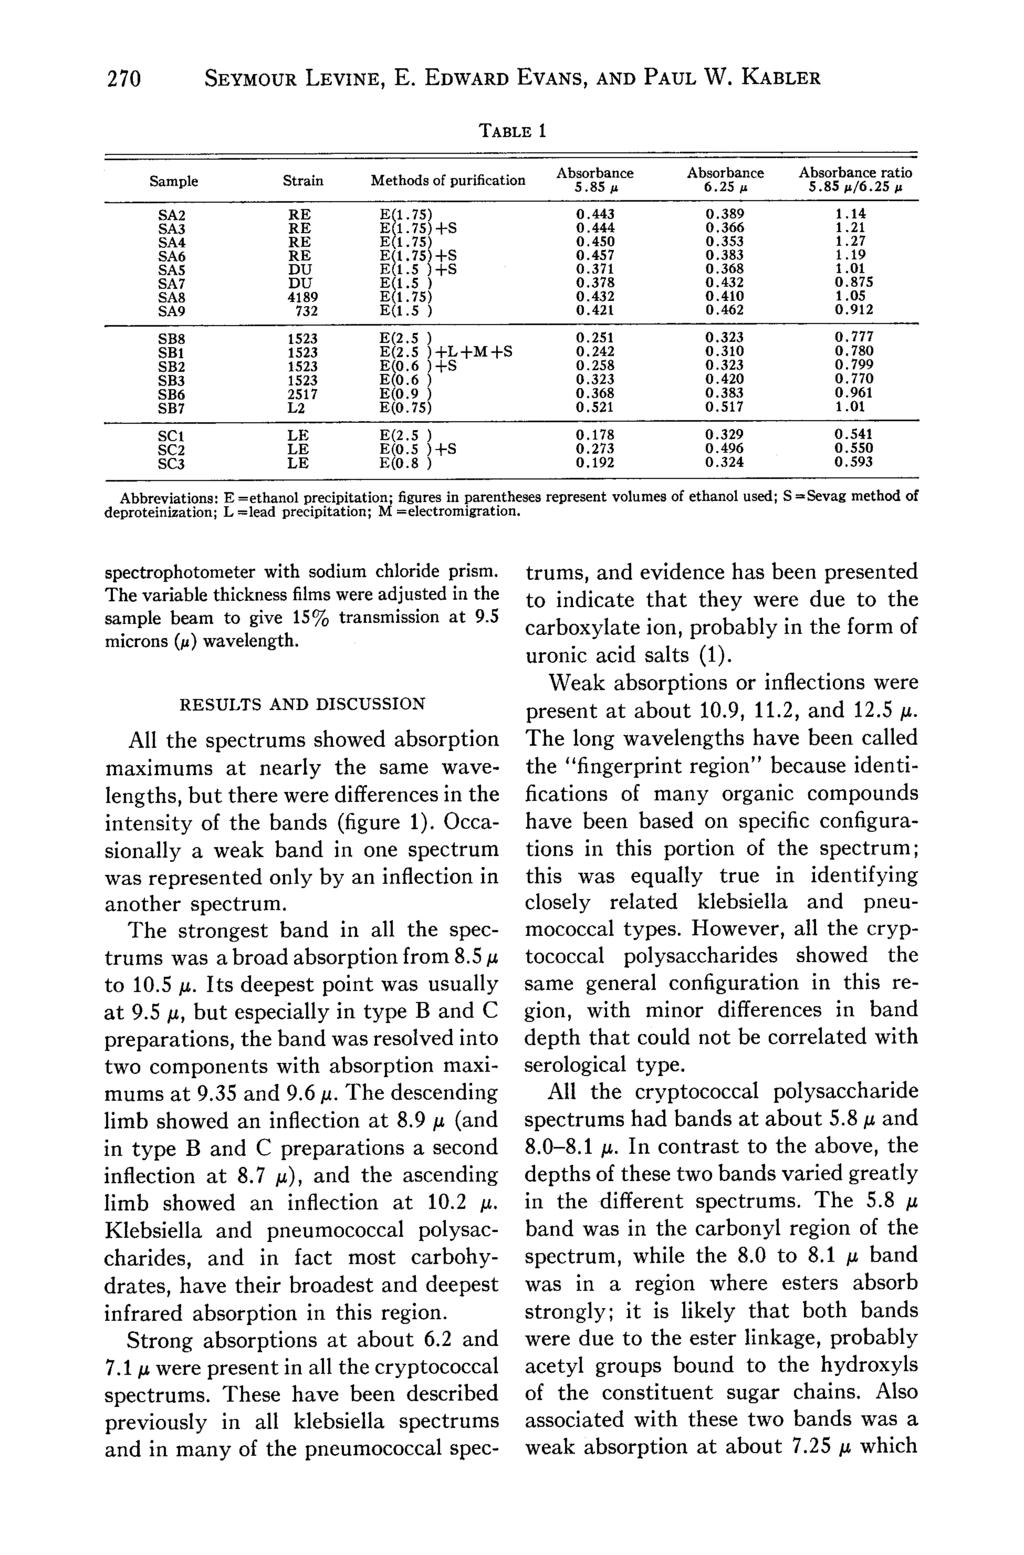 270 SEYMOUR LEVINE, E. EDWARD EVANS, AND PAUL W. KABLER TABLE 1 Sample Strain Methods of purification Absorbance Absorbance Absorbance ratio 5.85 I' 6.25 I' 5.851'/6.25 I' SA2 RE E~1. 75) 0.443 0.